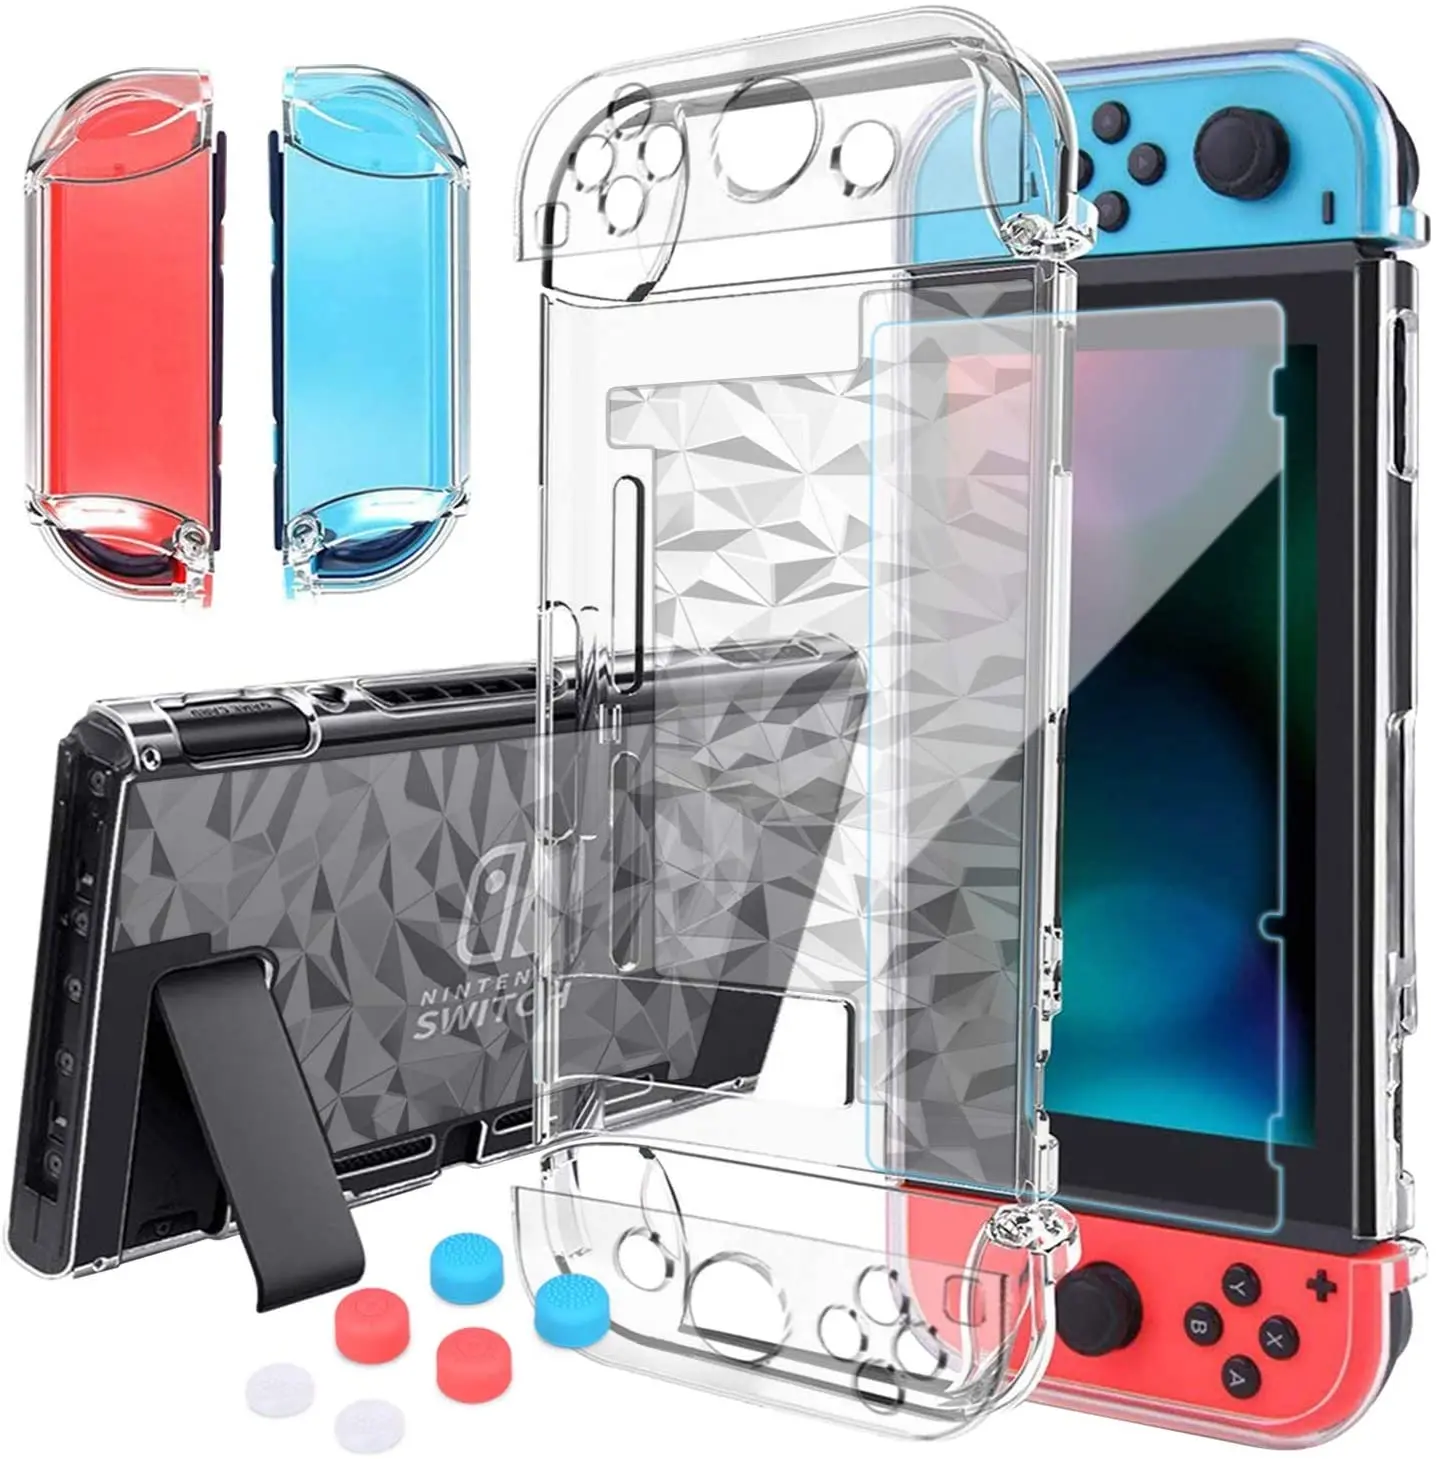 Mooroer Switch Case for Nintendo Switch Case Dockable with Screen Protector, Protective Case Cover for Nintendo Switch Tempered